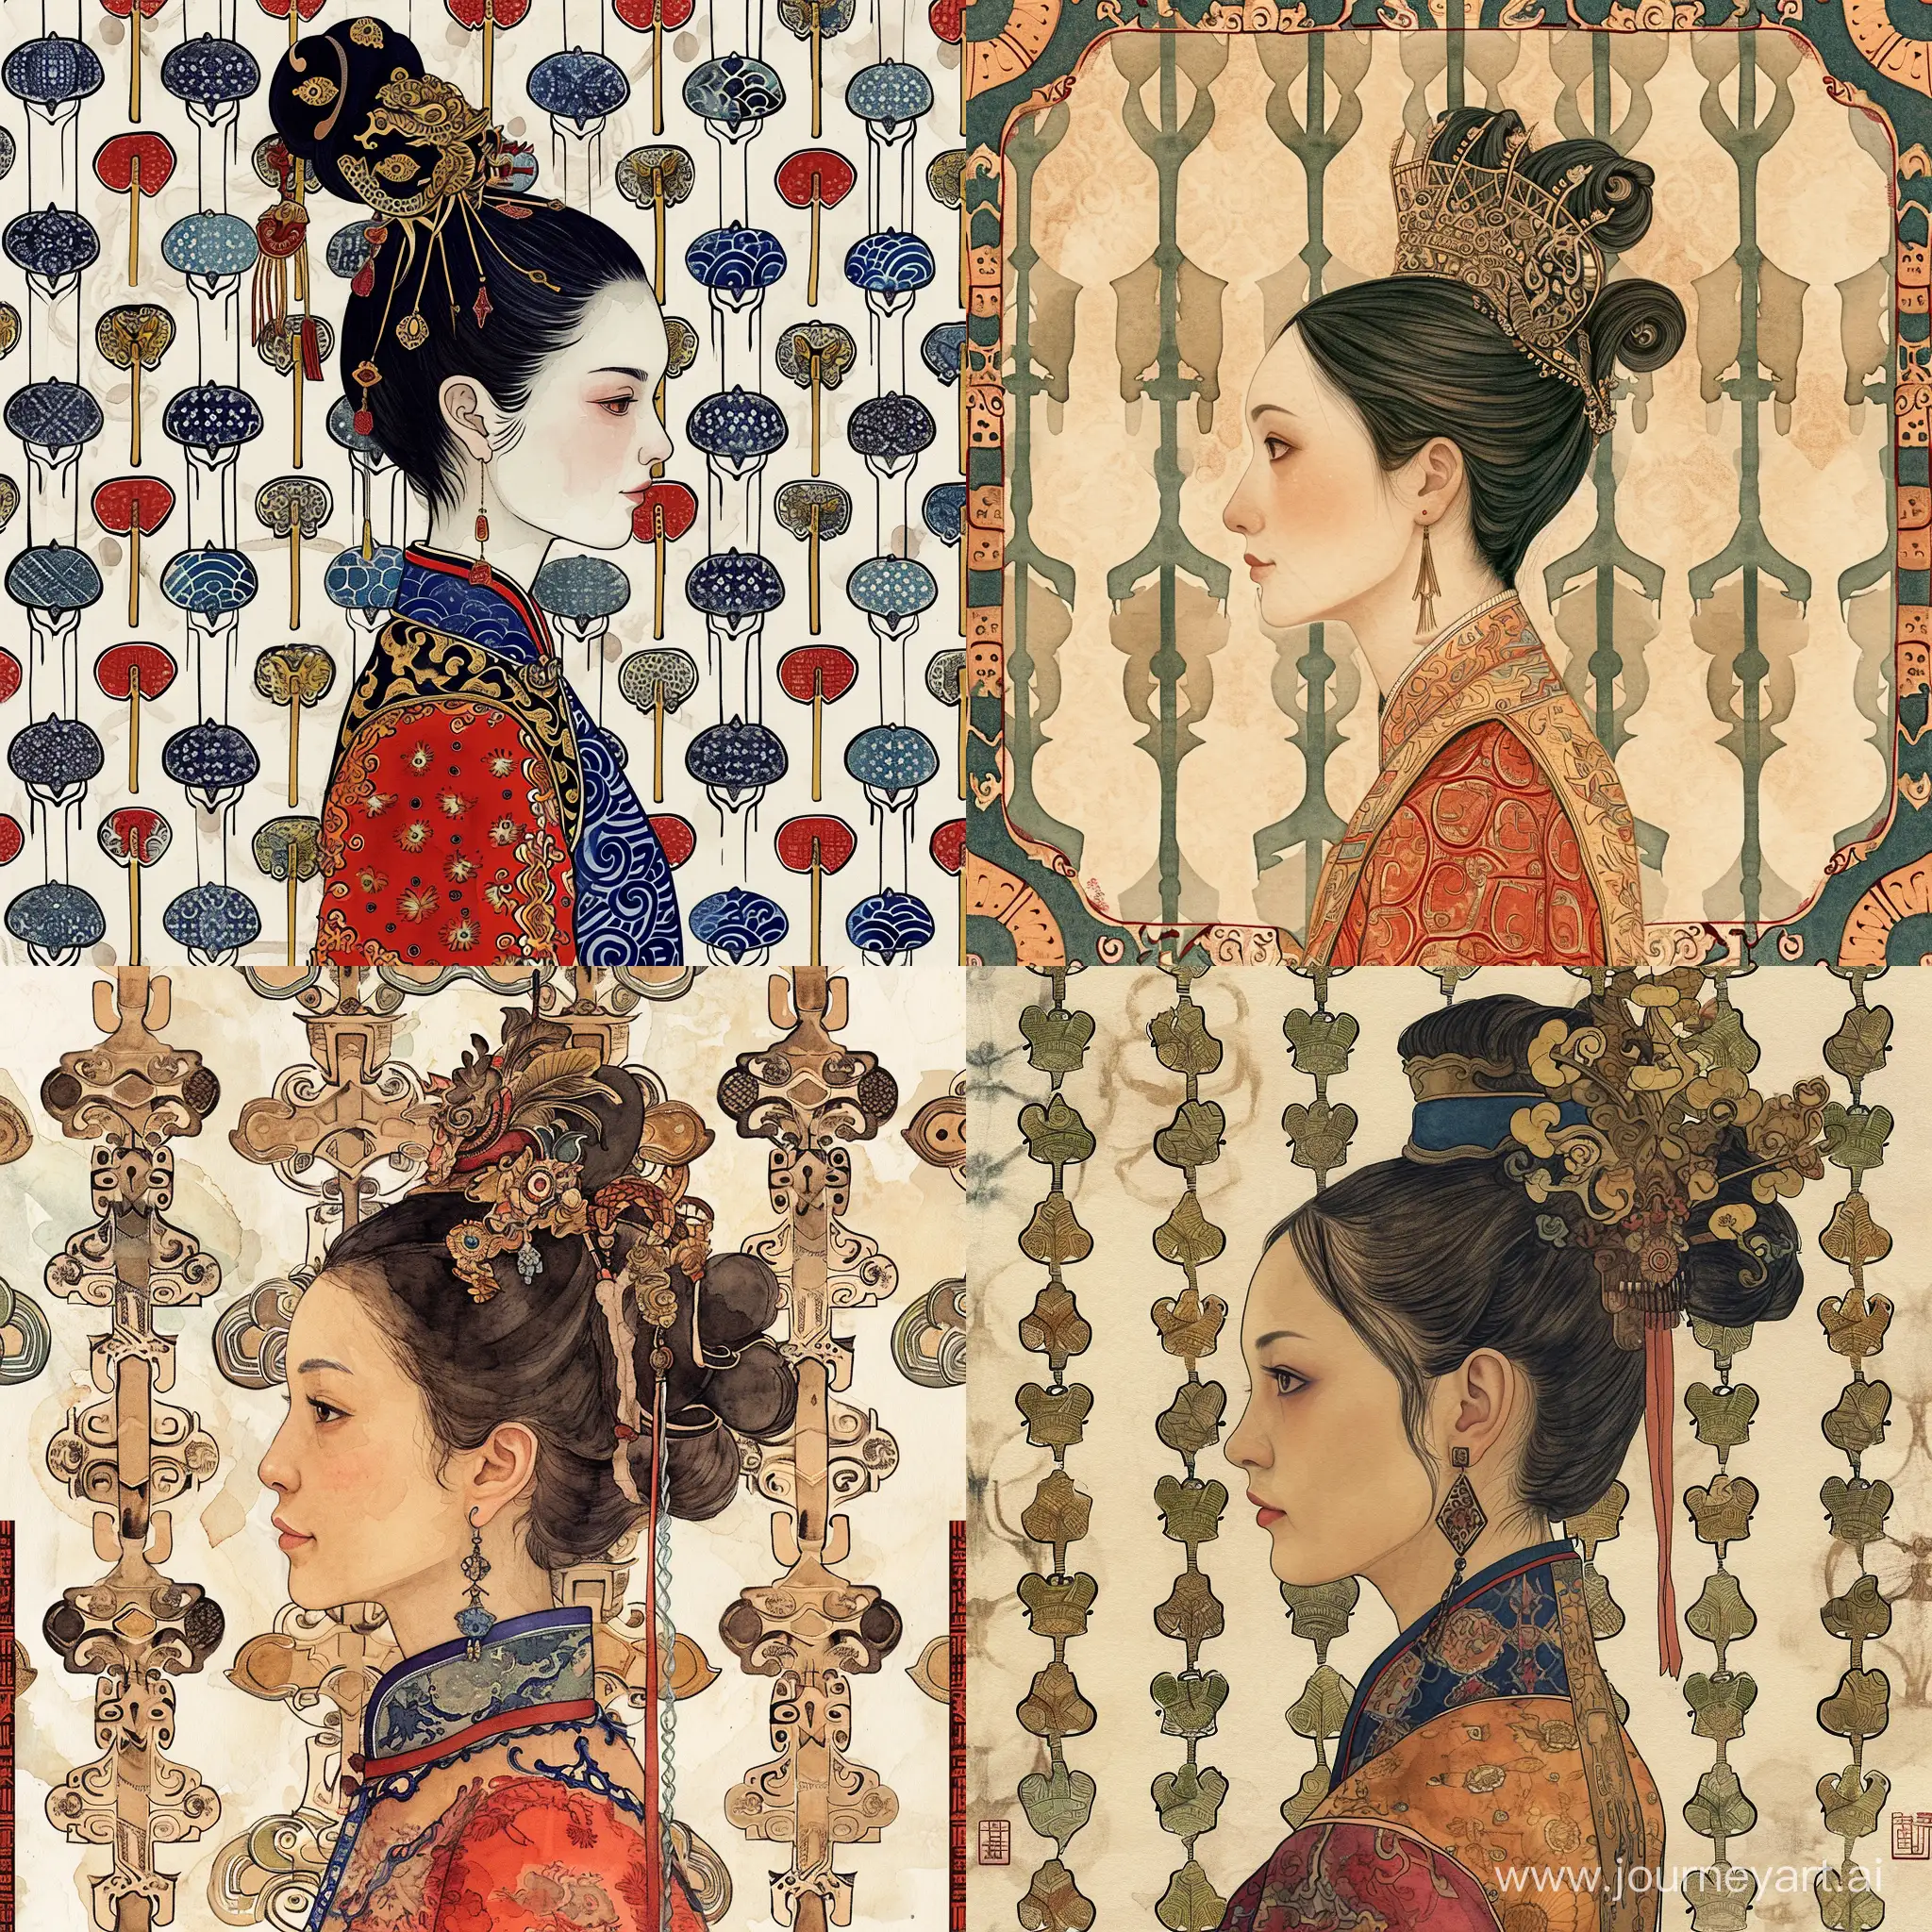 Wife of Qin Shi Huangdi, First Emperor of China, in profile, central portrait, Ancient Chinese Civilization, against a pattern of clubs, fairy tale illustration, stylized caricature, Victo Ngai, watercolor, drawing, decorative, flat drawing.


